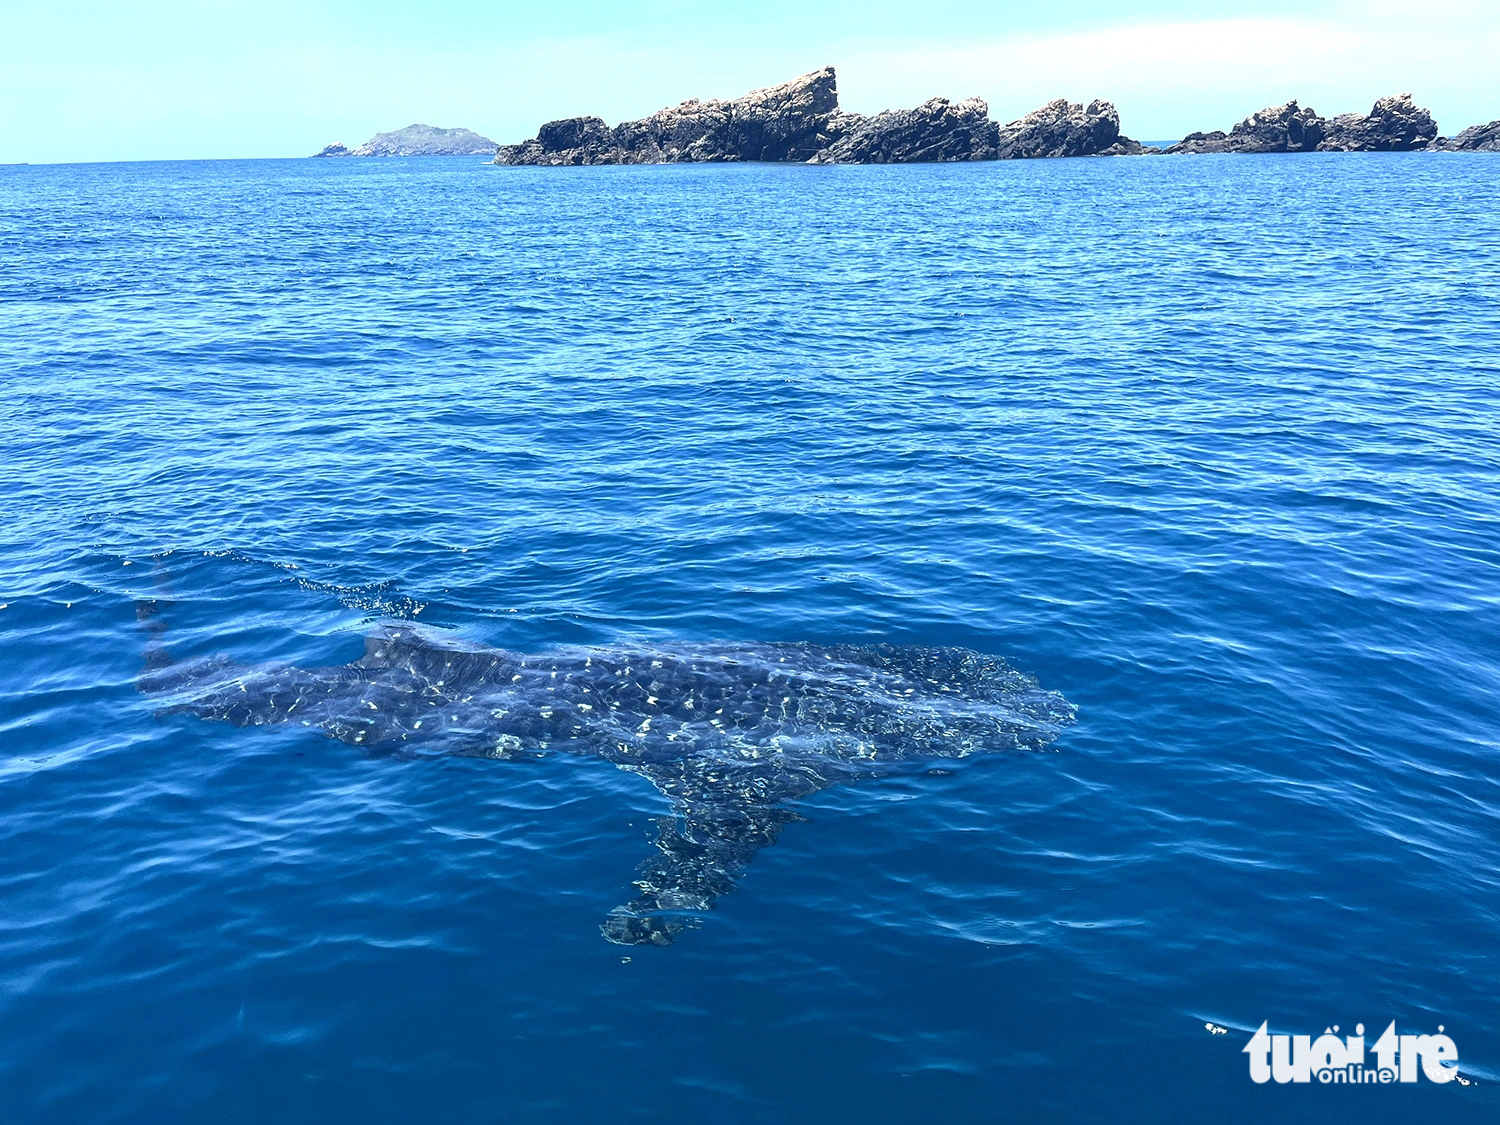 Whale shark spotted off south-central Vietnam coast